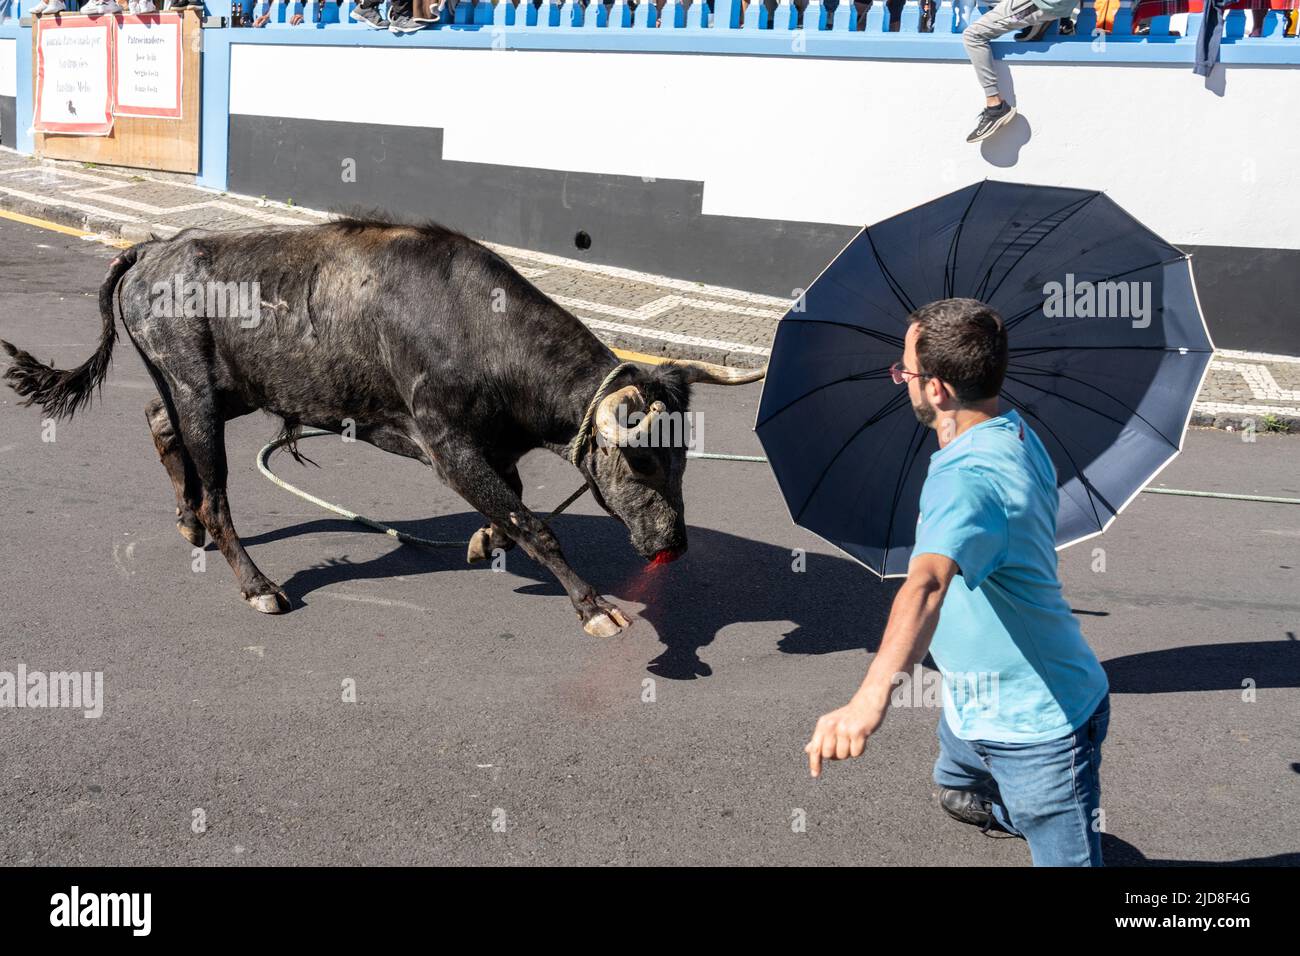 A bull charges a capinha or amateur bullfighter during a tourada a corda, also called a bull-on-a-rope at the Sanjoaninas festival, June 18, 2022 in Angra do Heroísmo, Terceira Island, Azores, Portugal. During the uniquely Azorean event a bull tied to a long rope runs loose as participants attempt to distract or run from the bull. Stock Photo